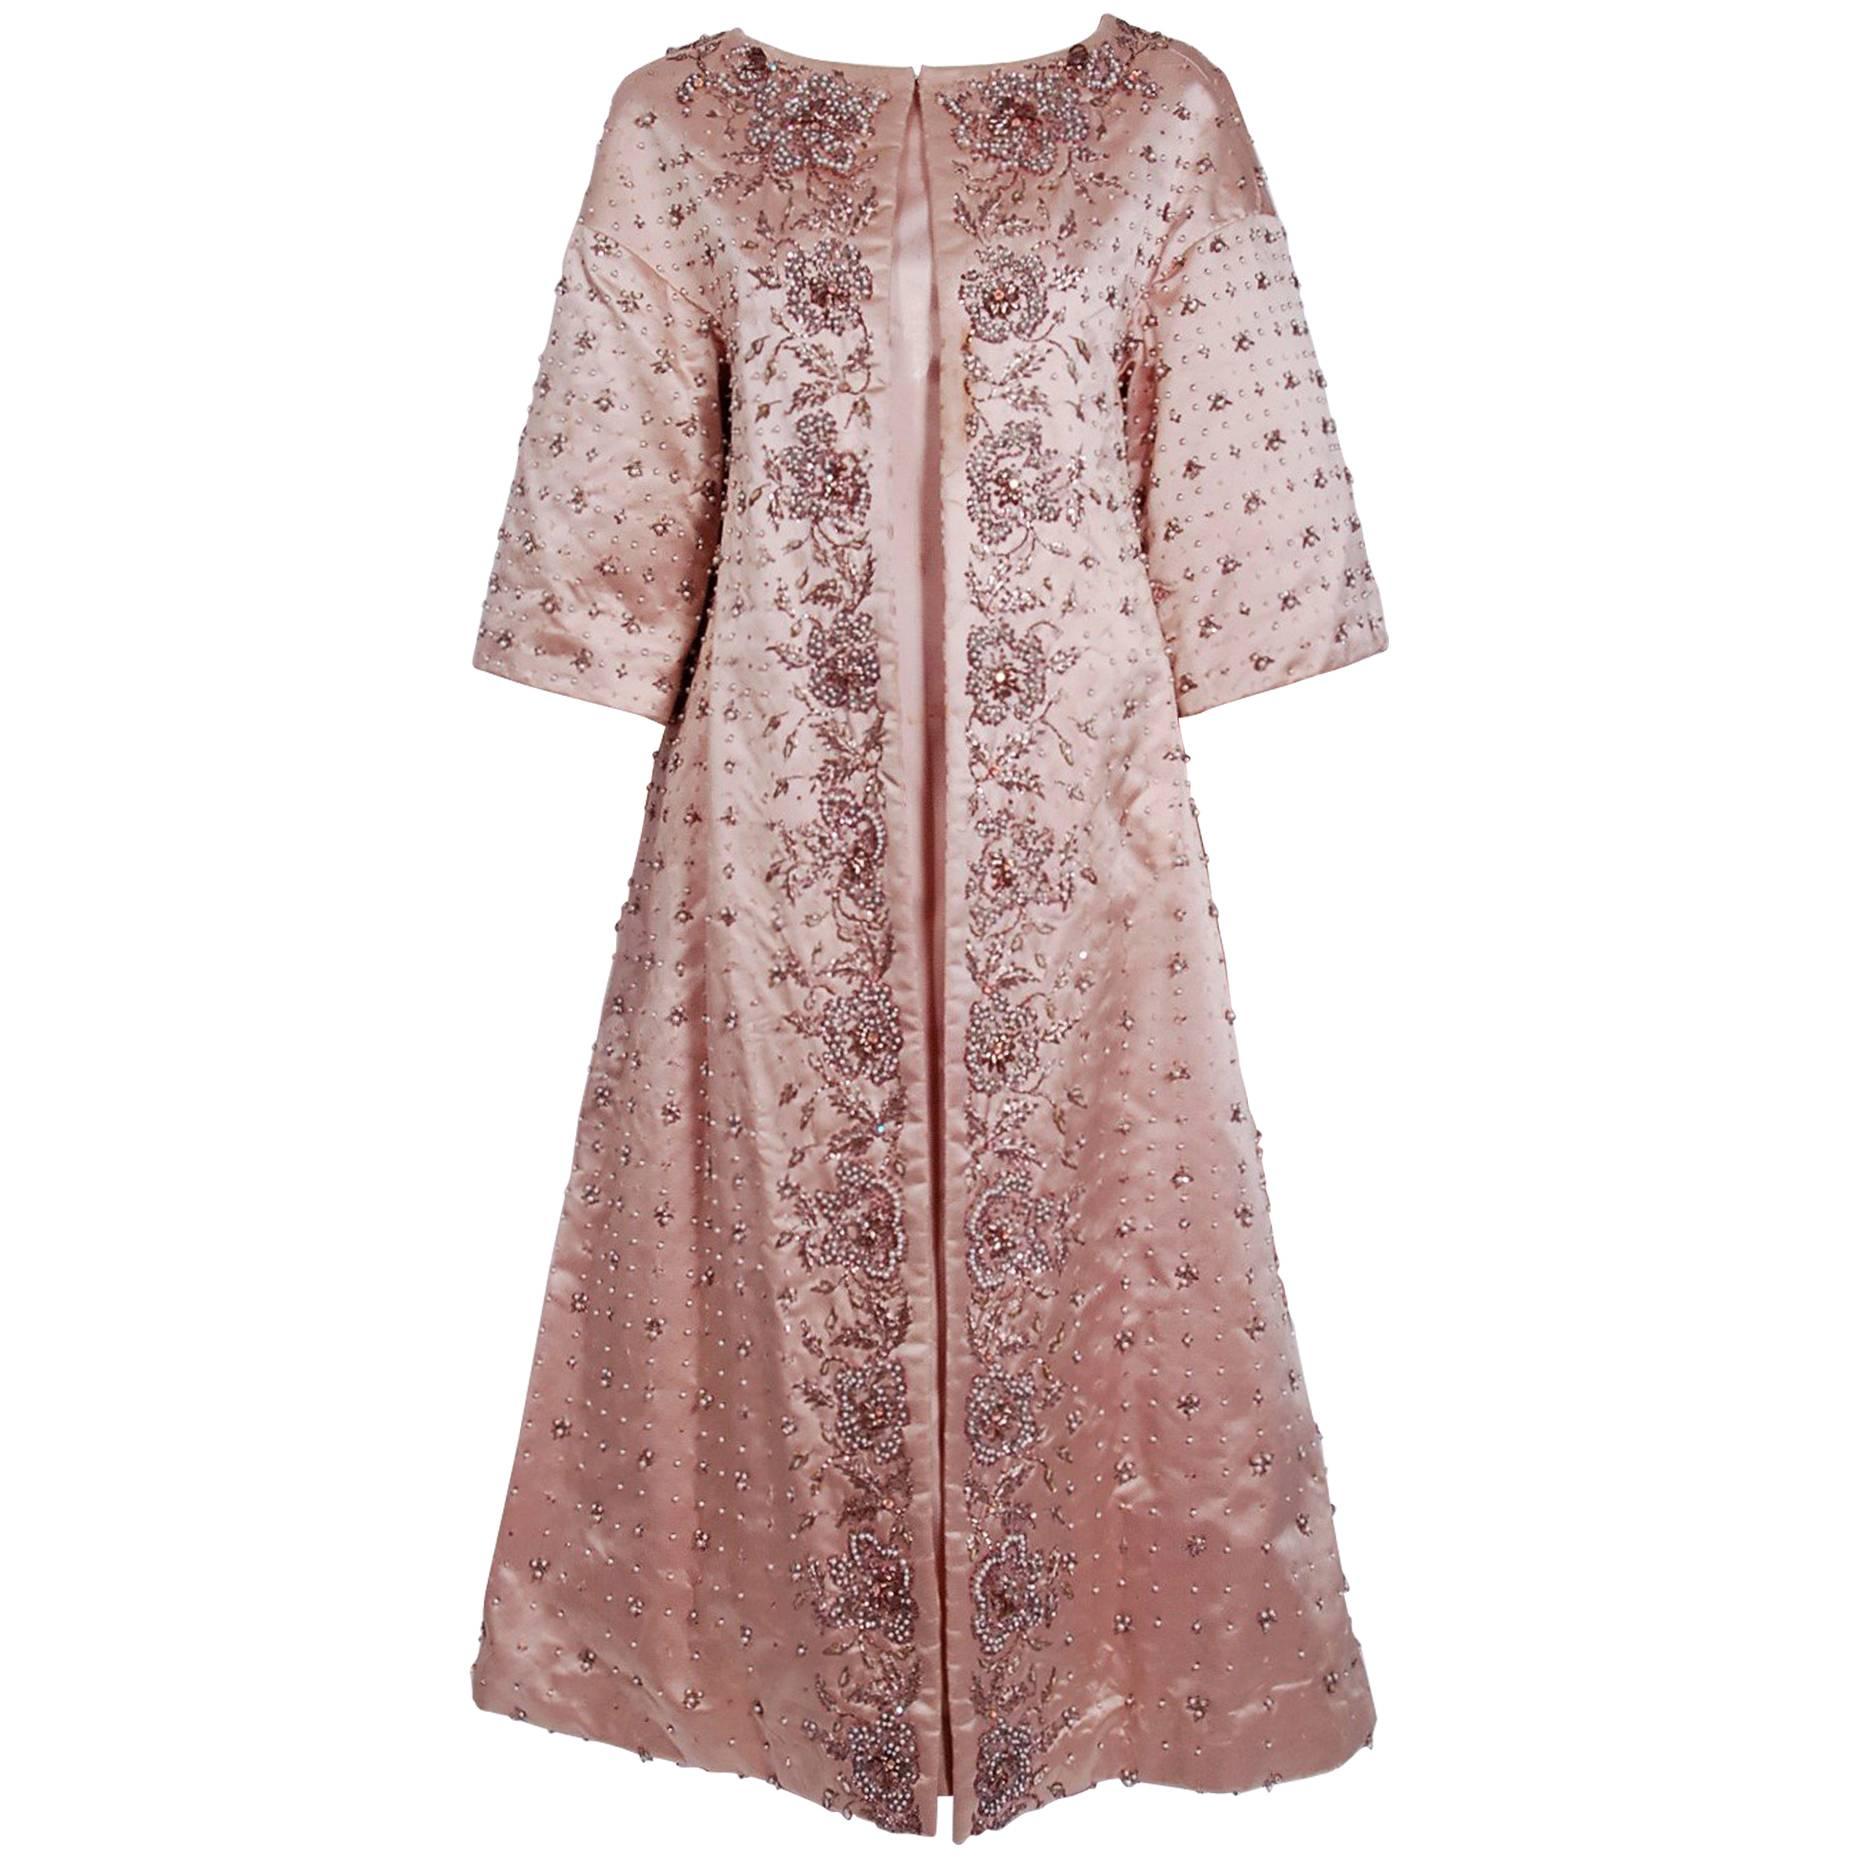 1951 Christian Dior Haute-Couture Beaded Lesage Embroidery Pink Satin Coat